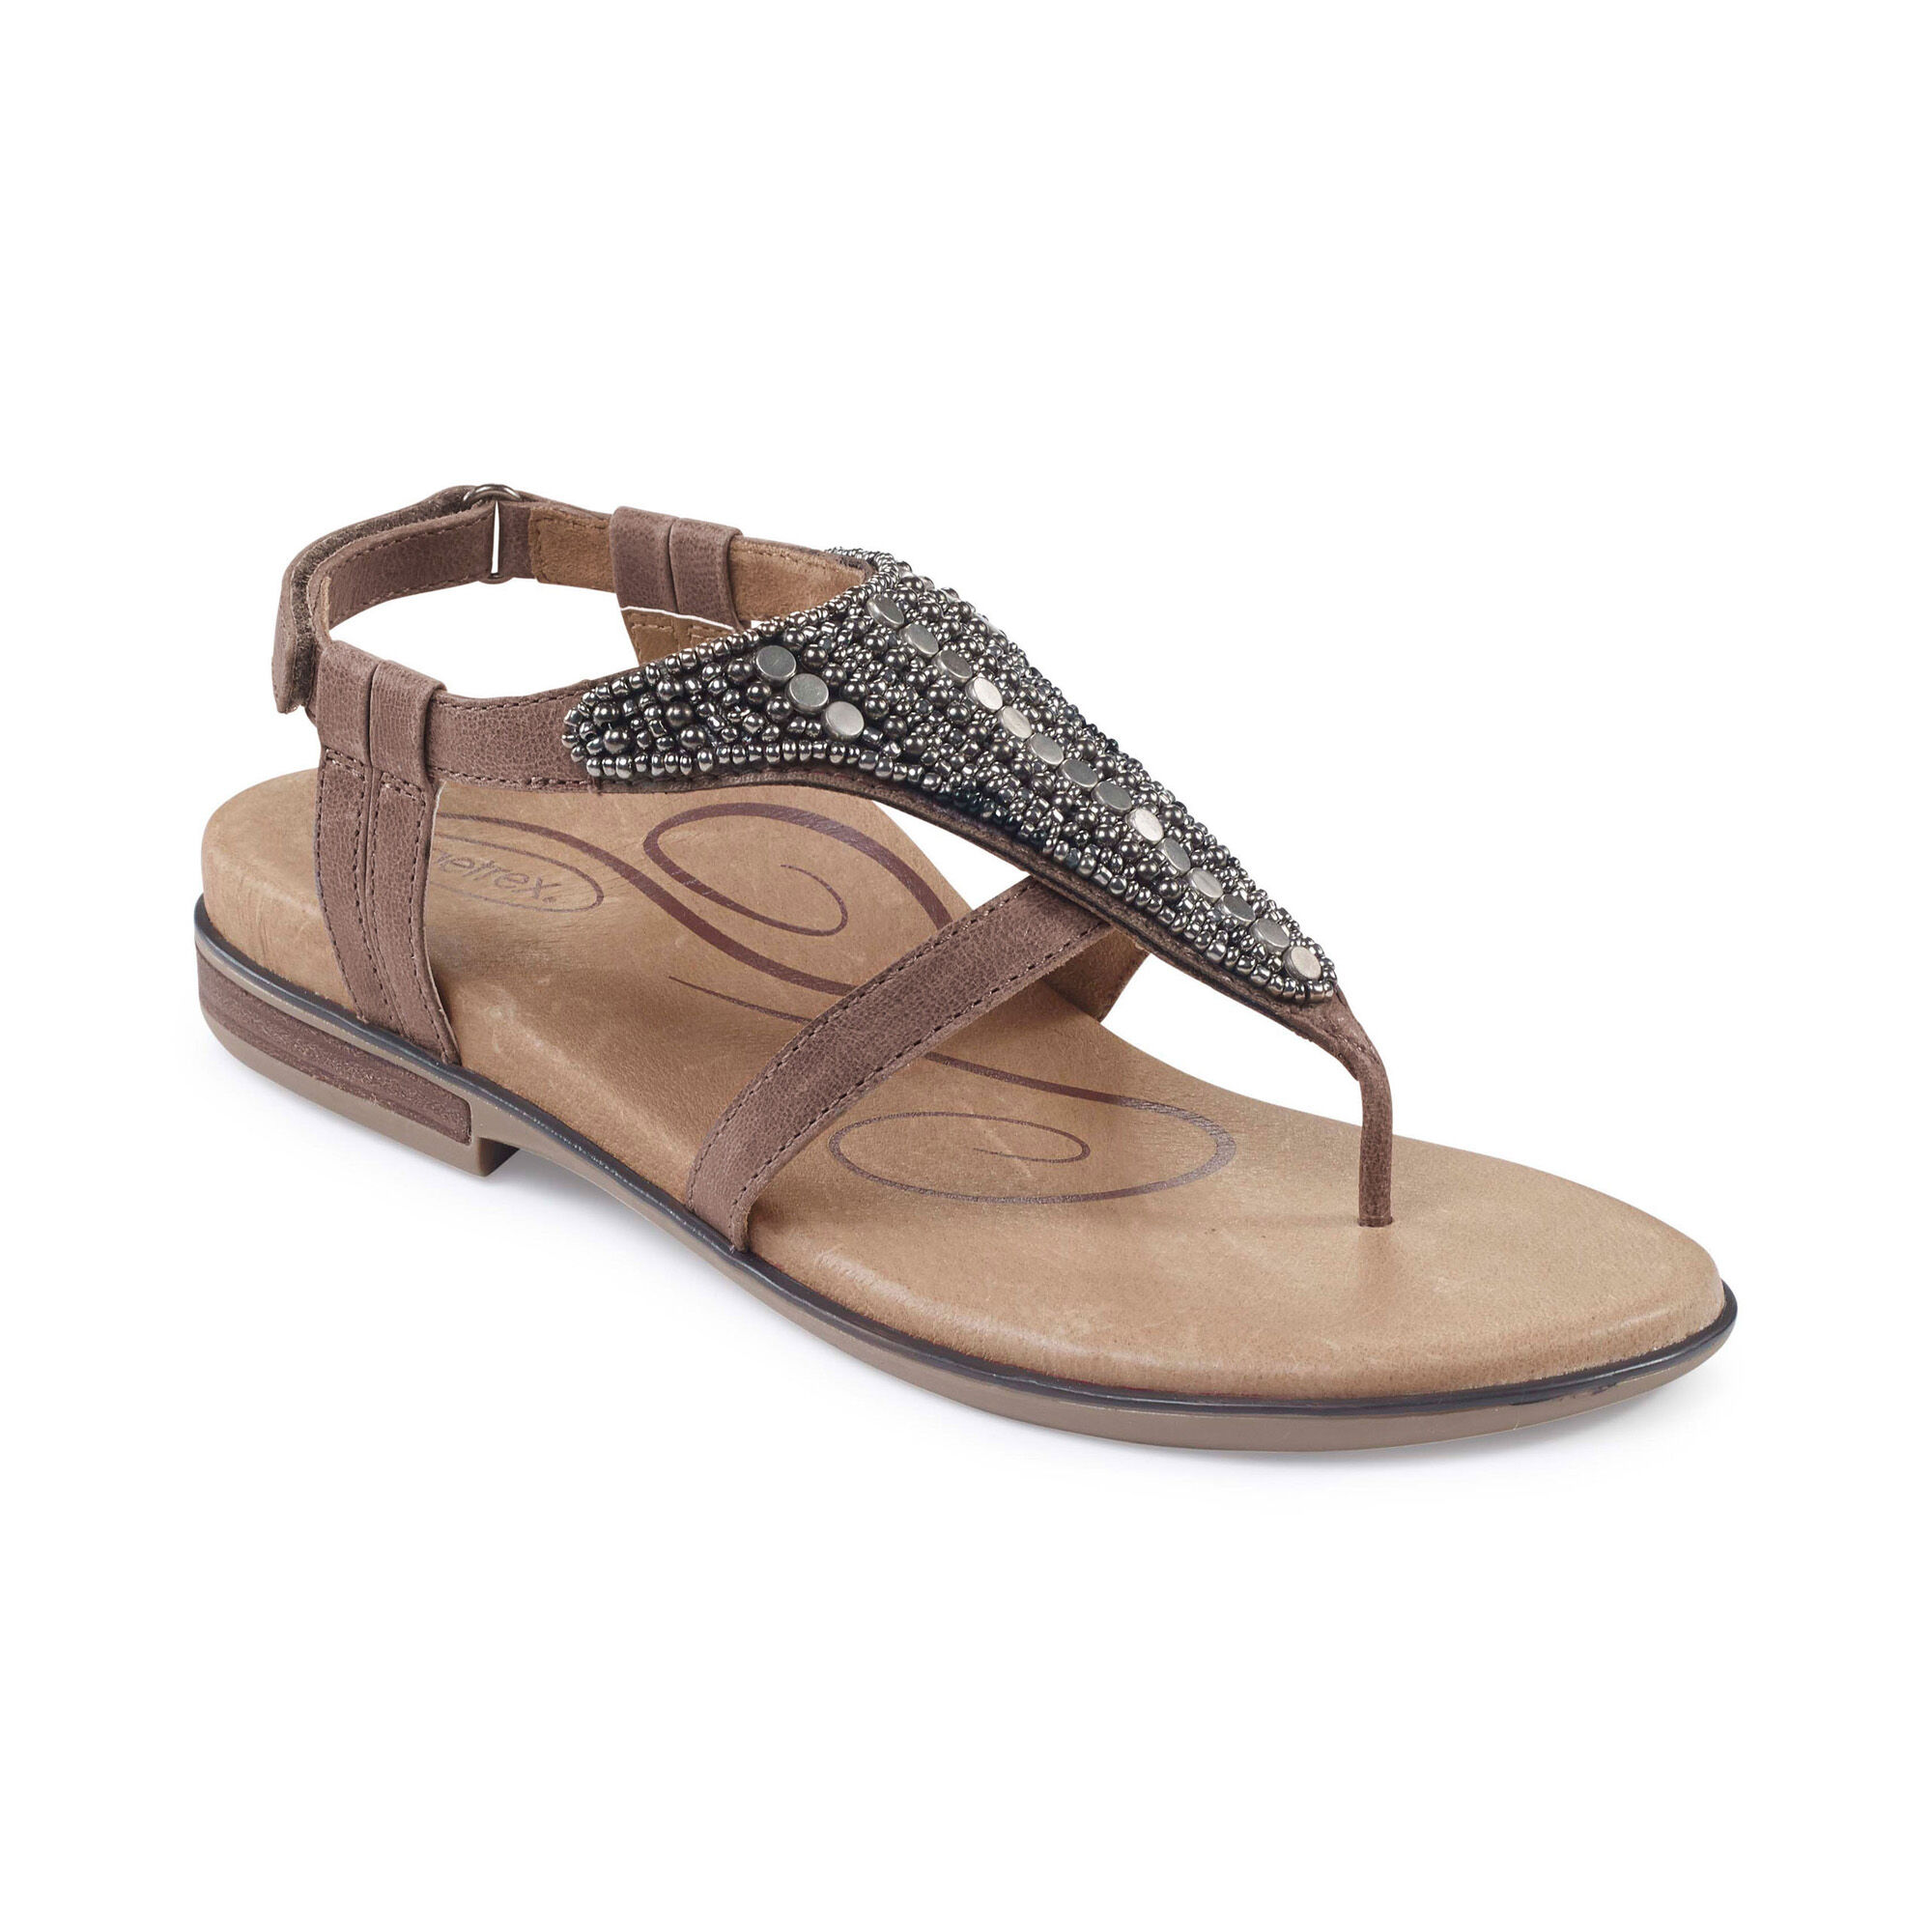 dressy flip flops with arch support